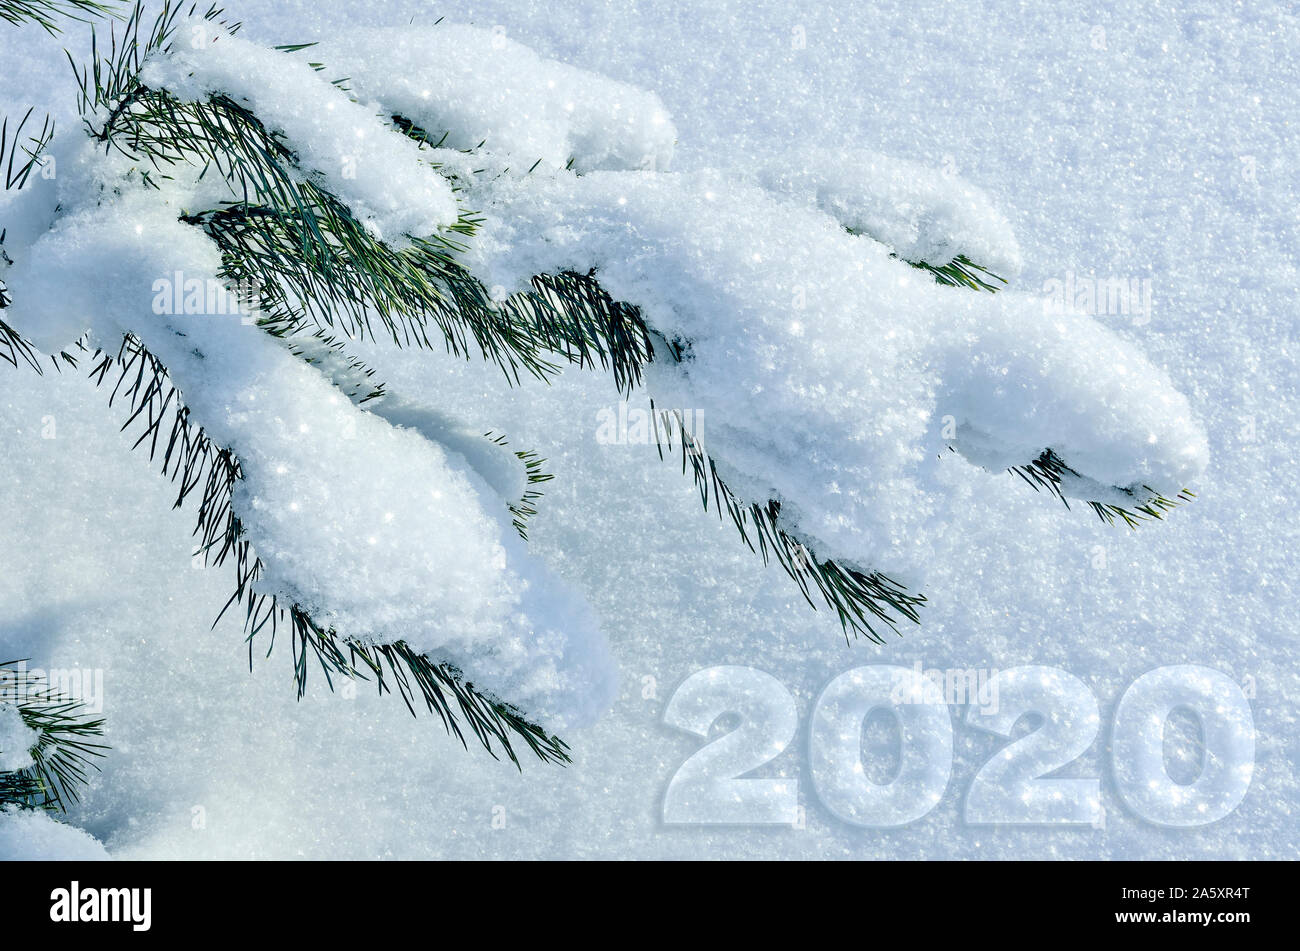 Winter, Christmas or New Year greeting card or calendar cover template with green snow-covered fir branch and date 2020. Winter seasonal design. Stock Photo